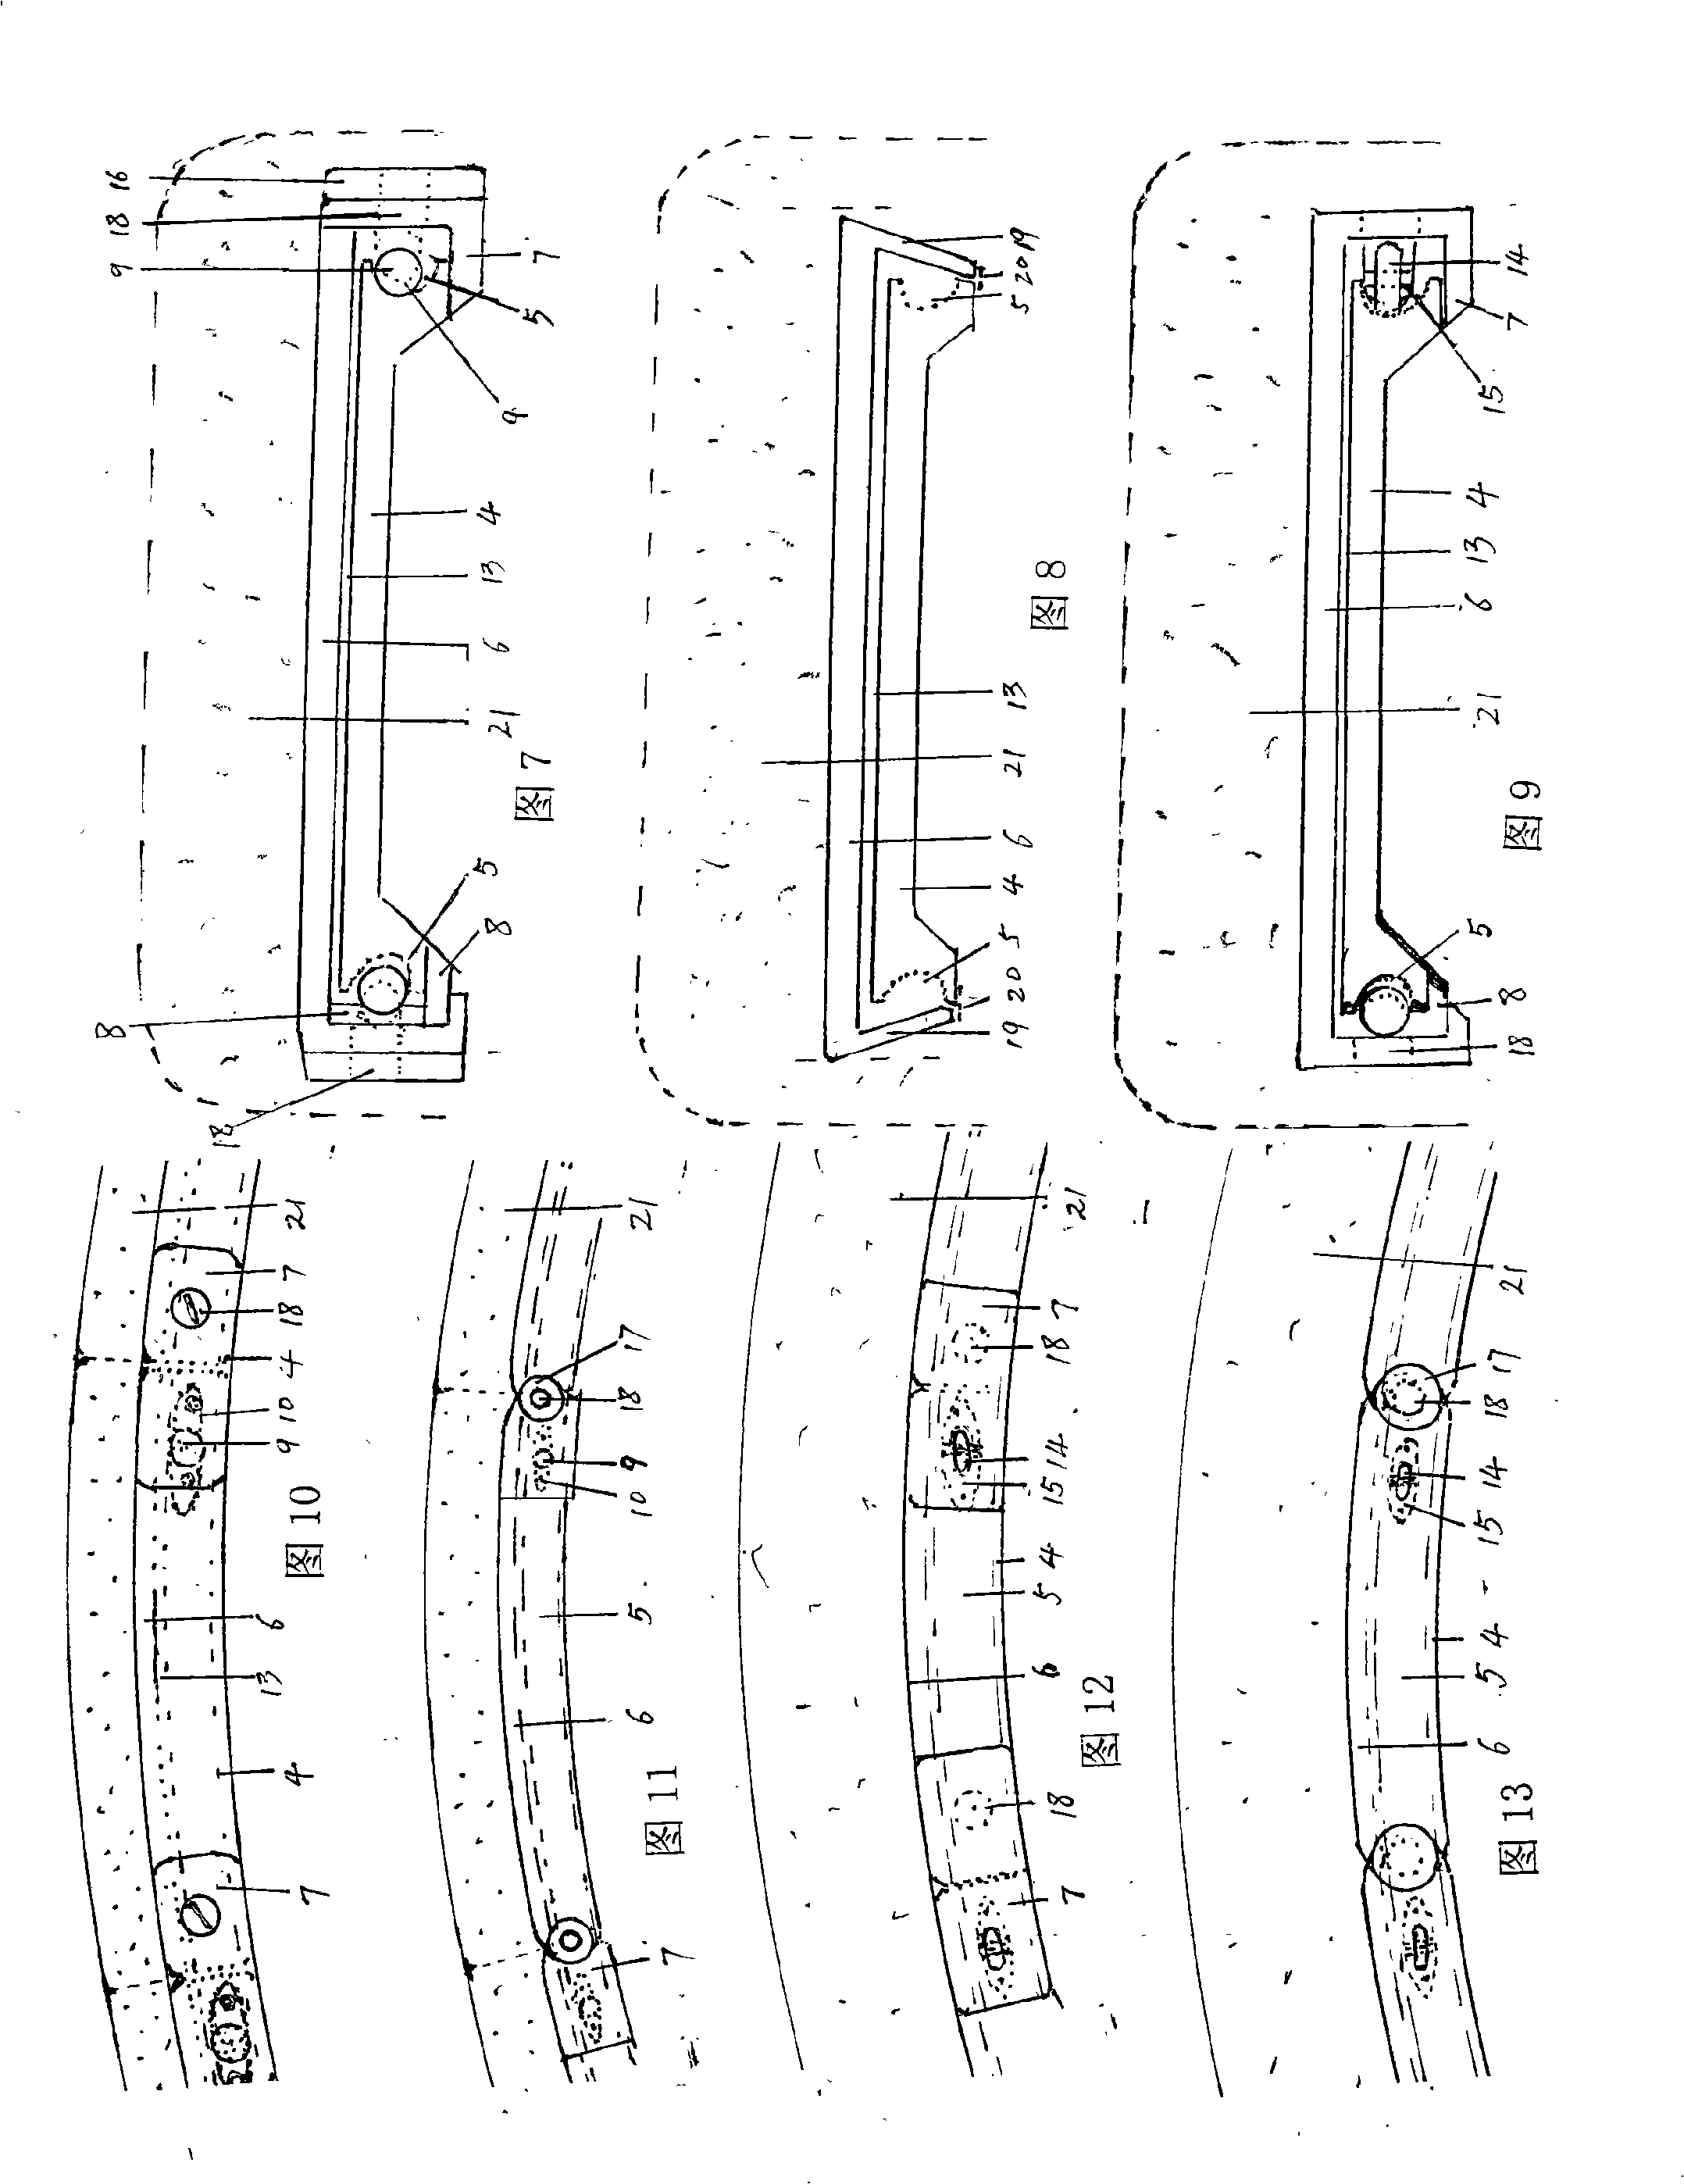 Sliding type bumper and lifting arm, buffering device and SRS sensing facilities